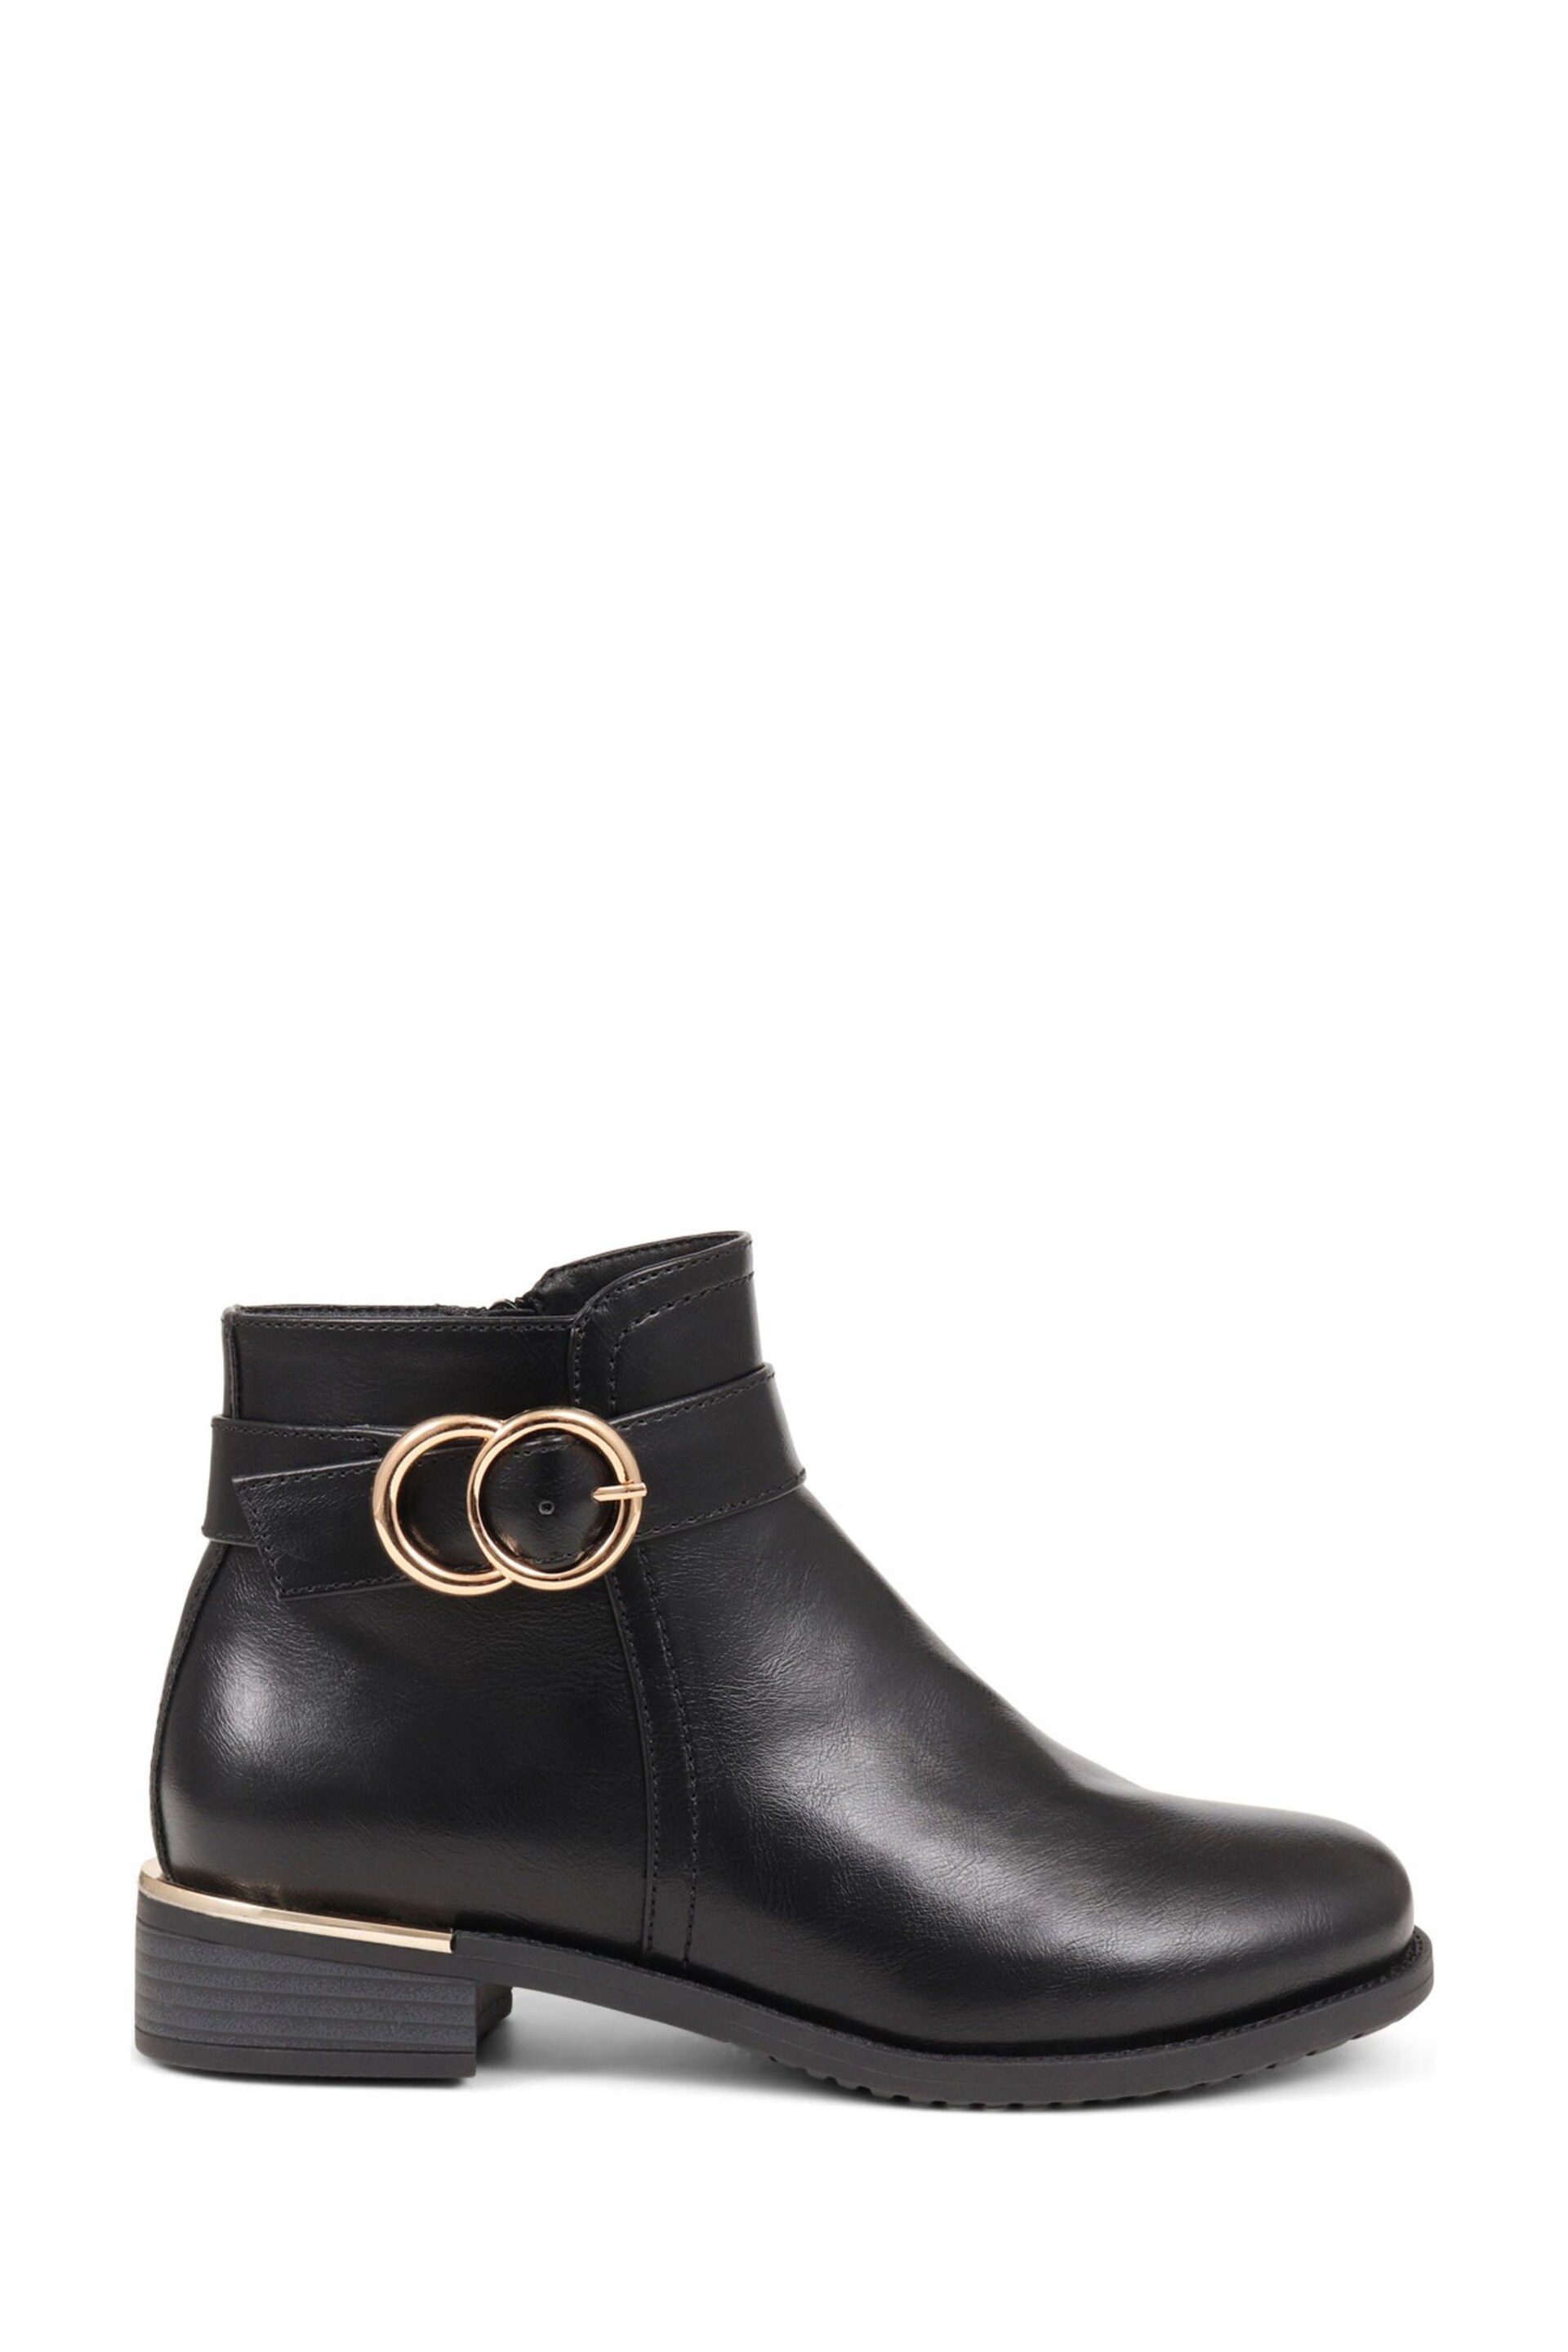 Pavers Black Buckle Detail Ankle Boots - Image 1 of 5